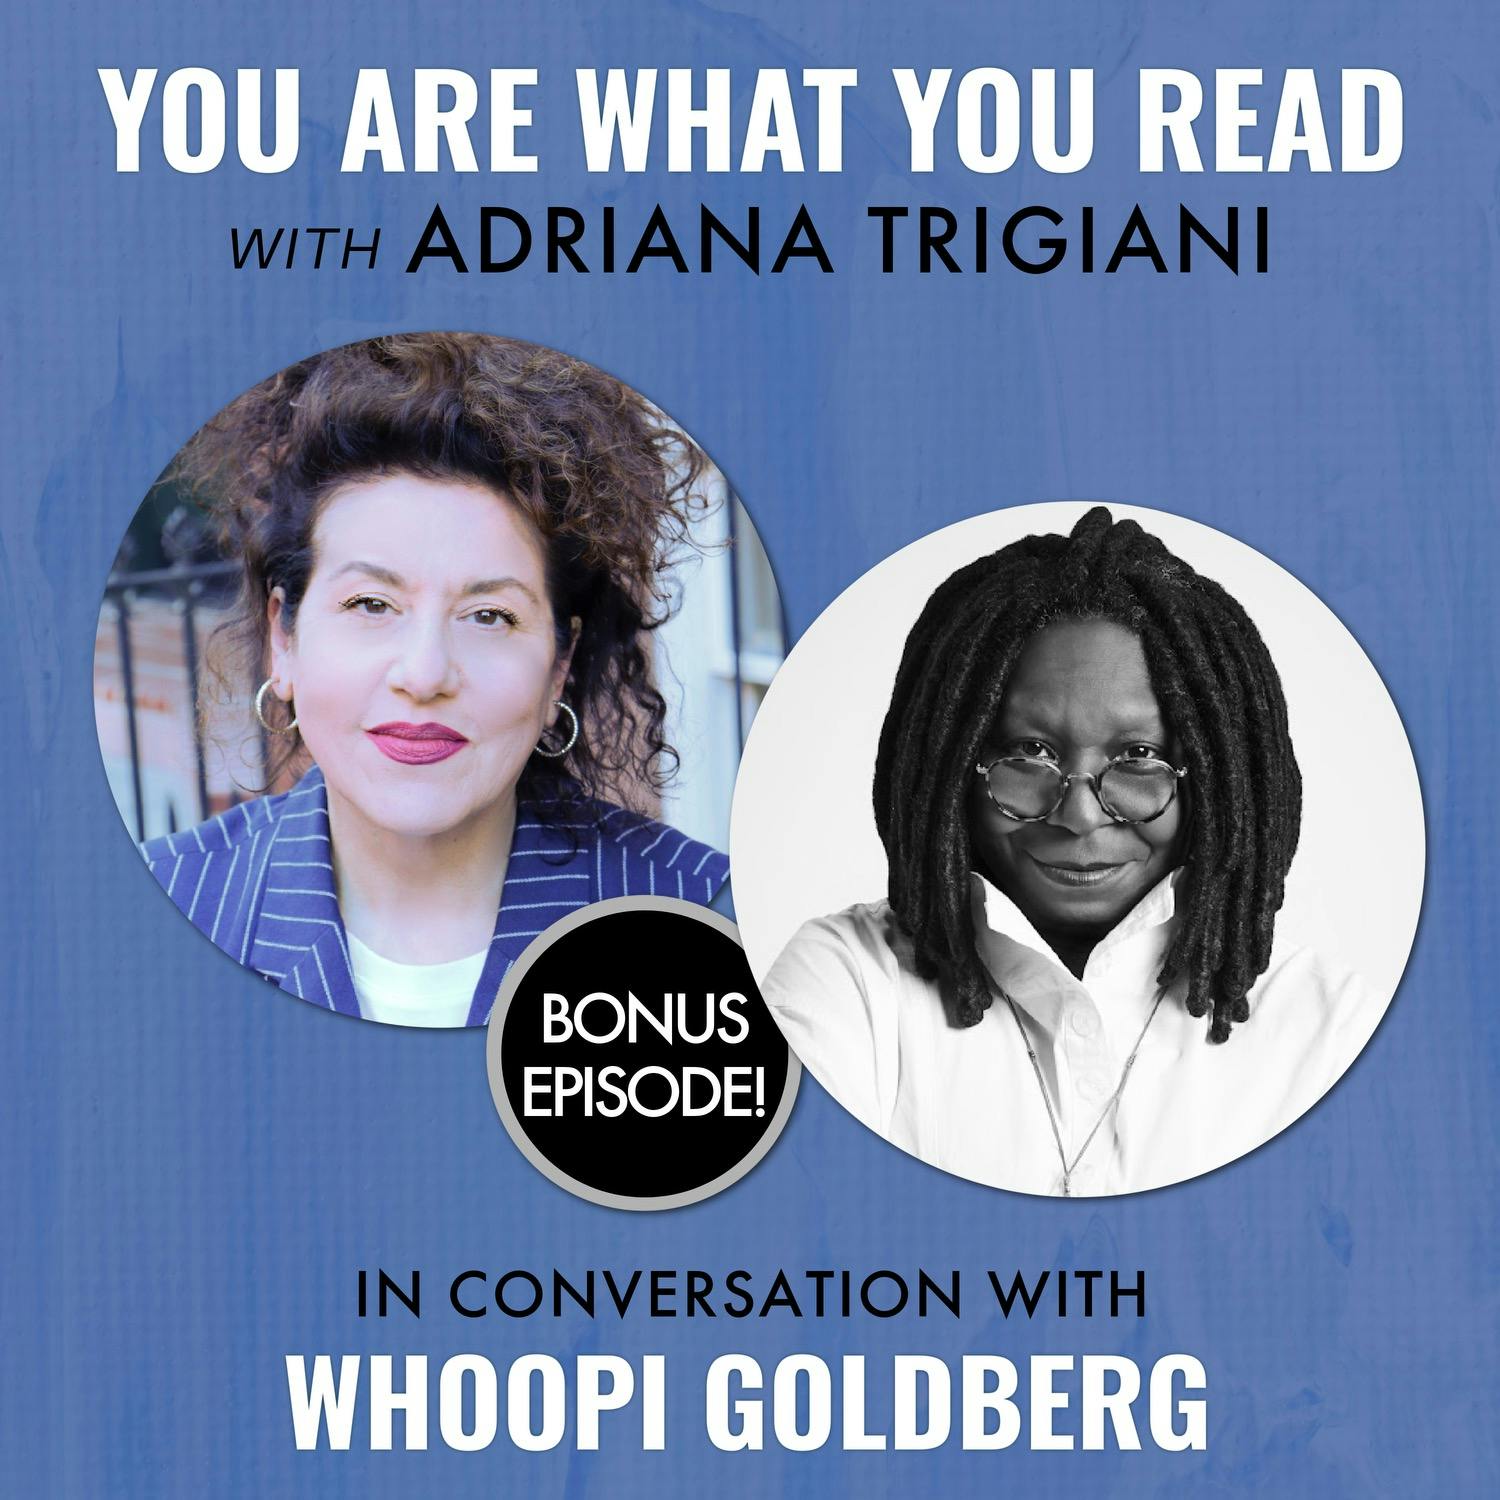 LIVE with Whoopi Goldberg at the 92nd Street Y